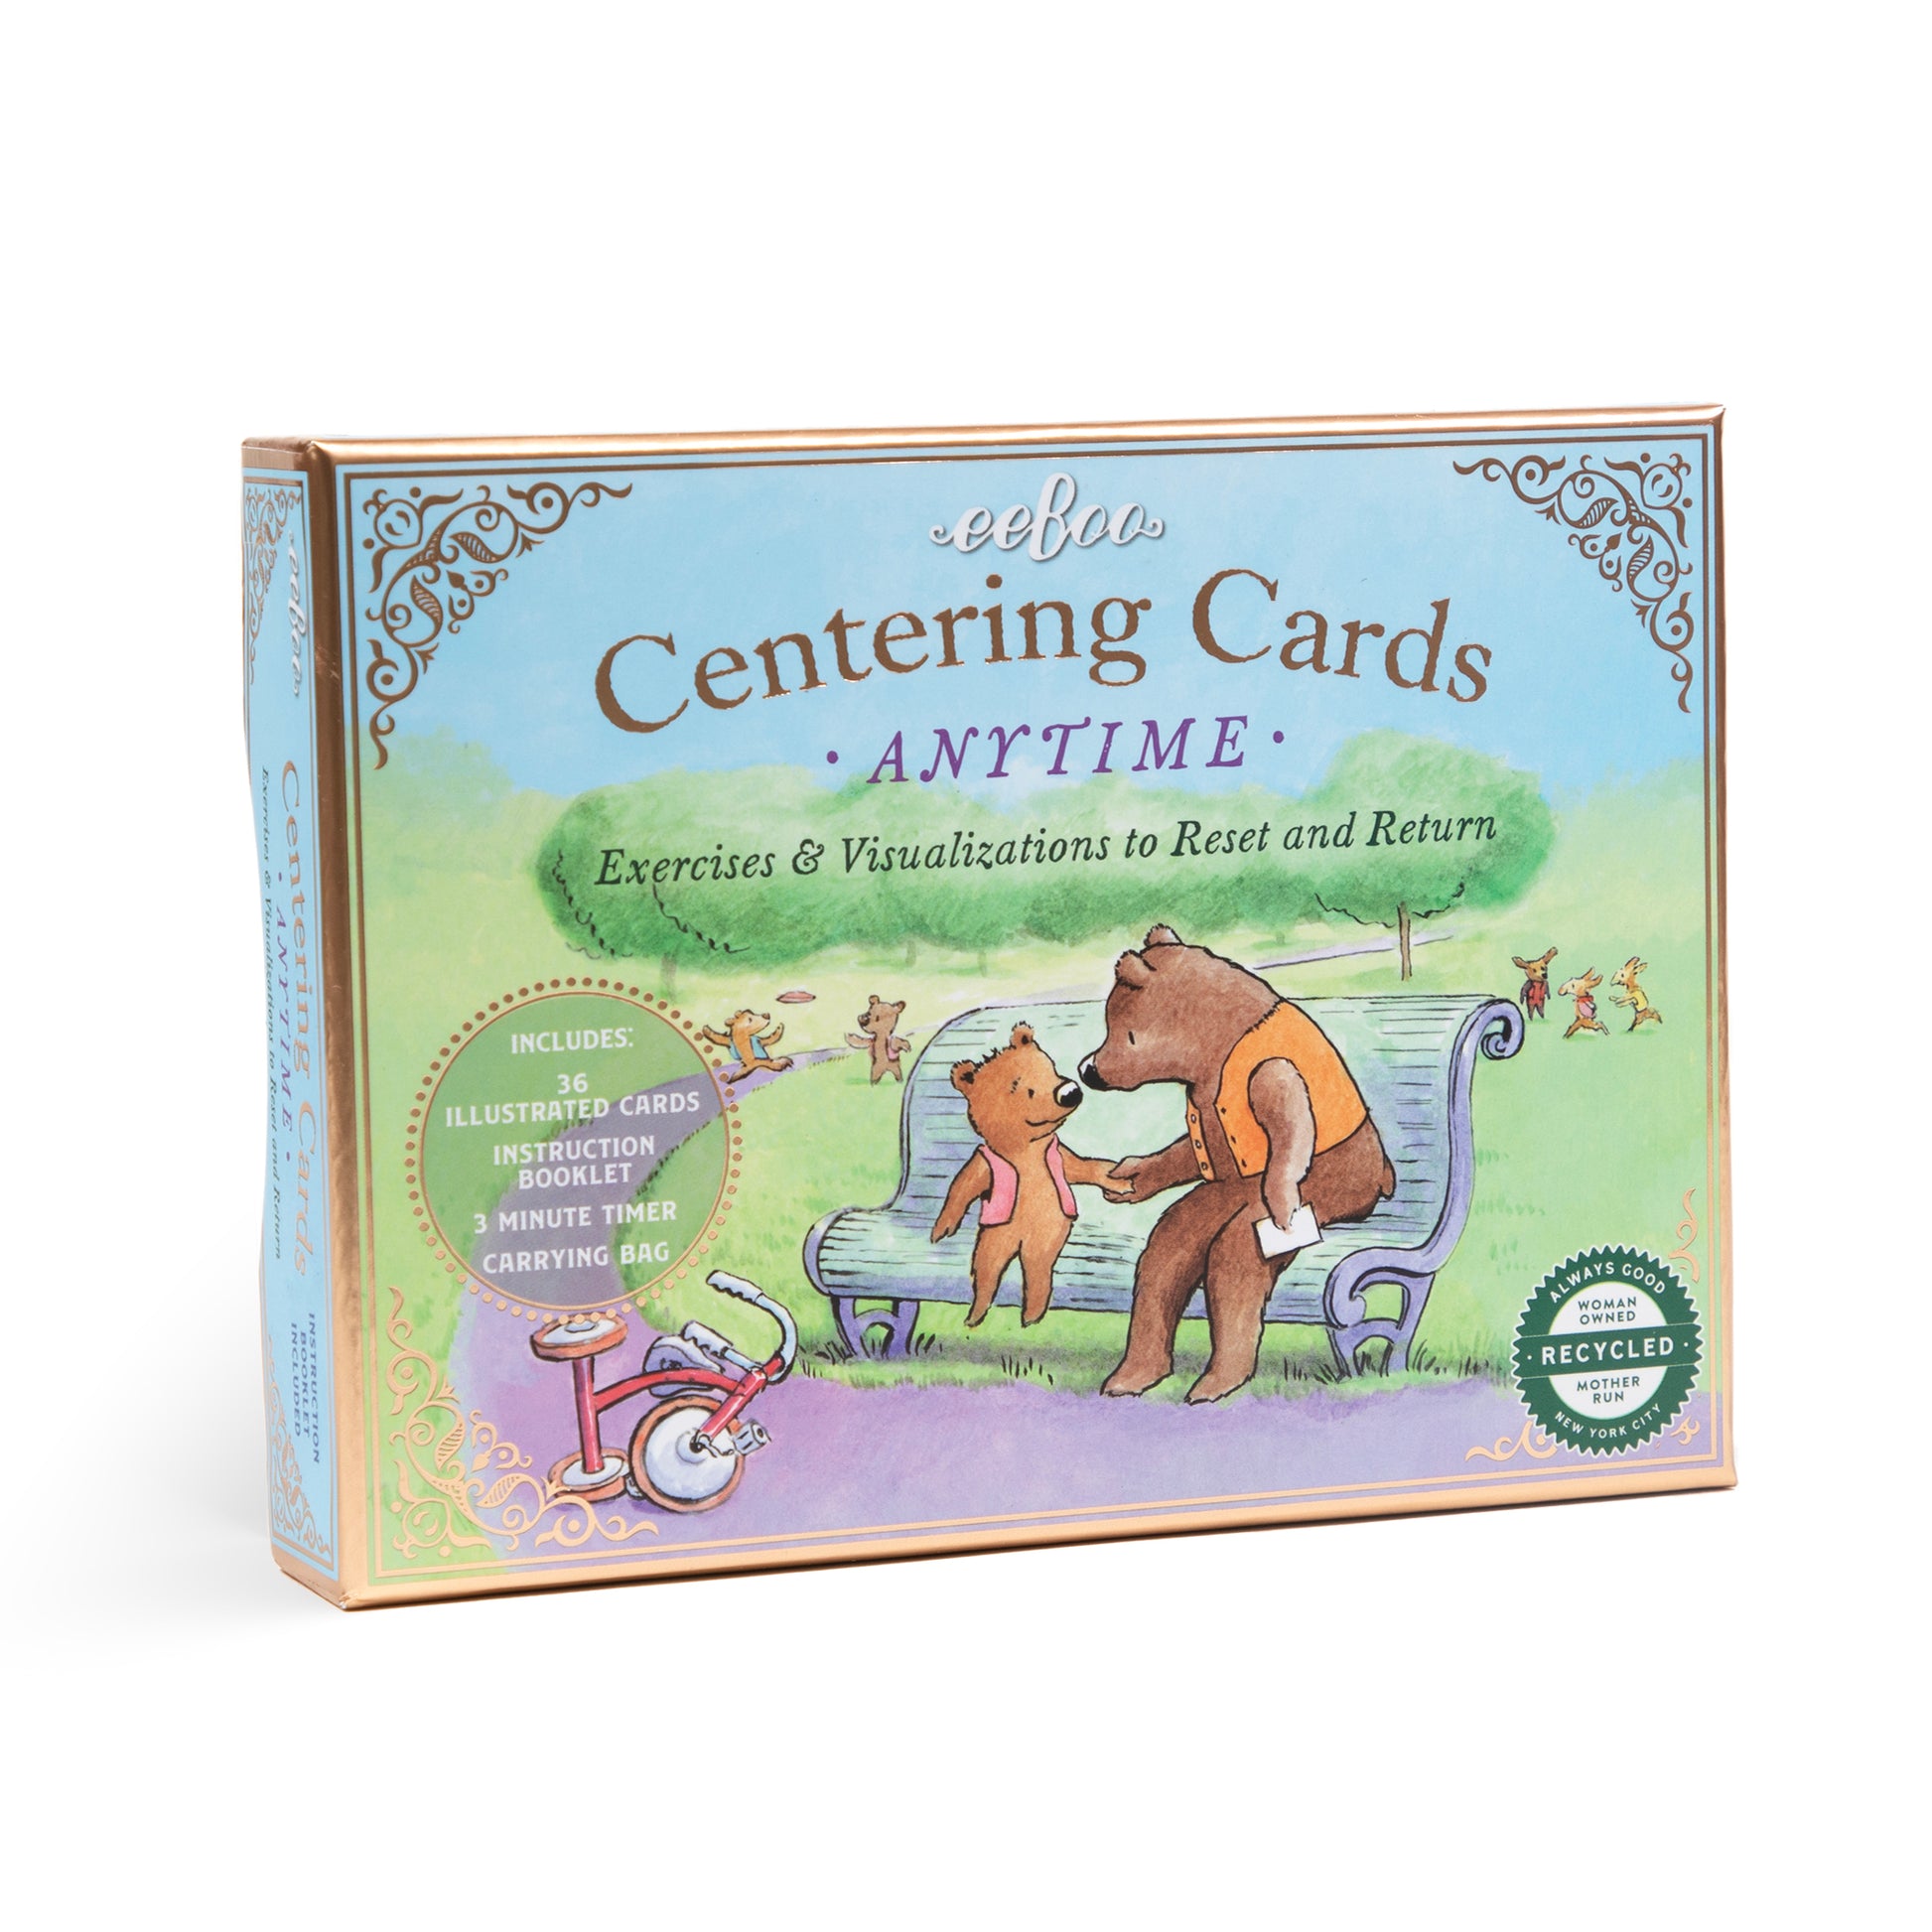 Anytime Centering Calming Cards for Children of All Ages by eeBoo | Gentle Parenting Skills | Special Needs Adaptable